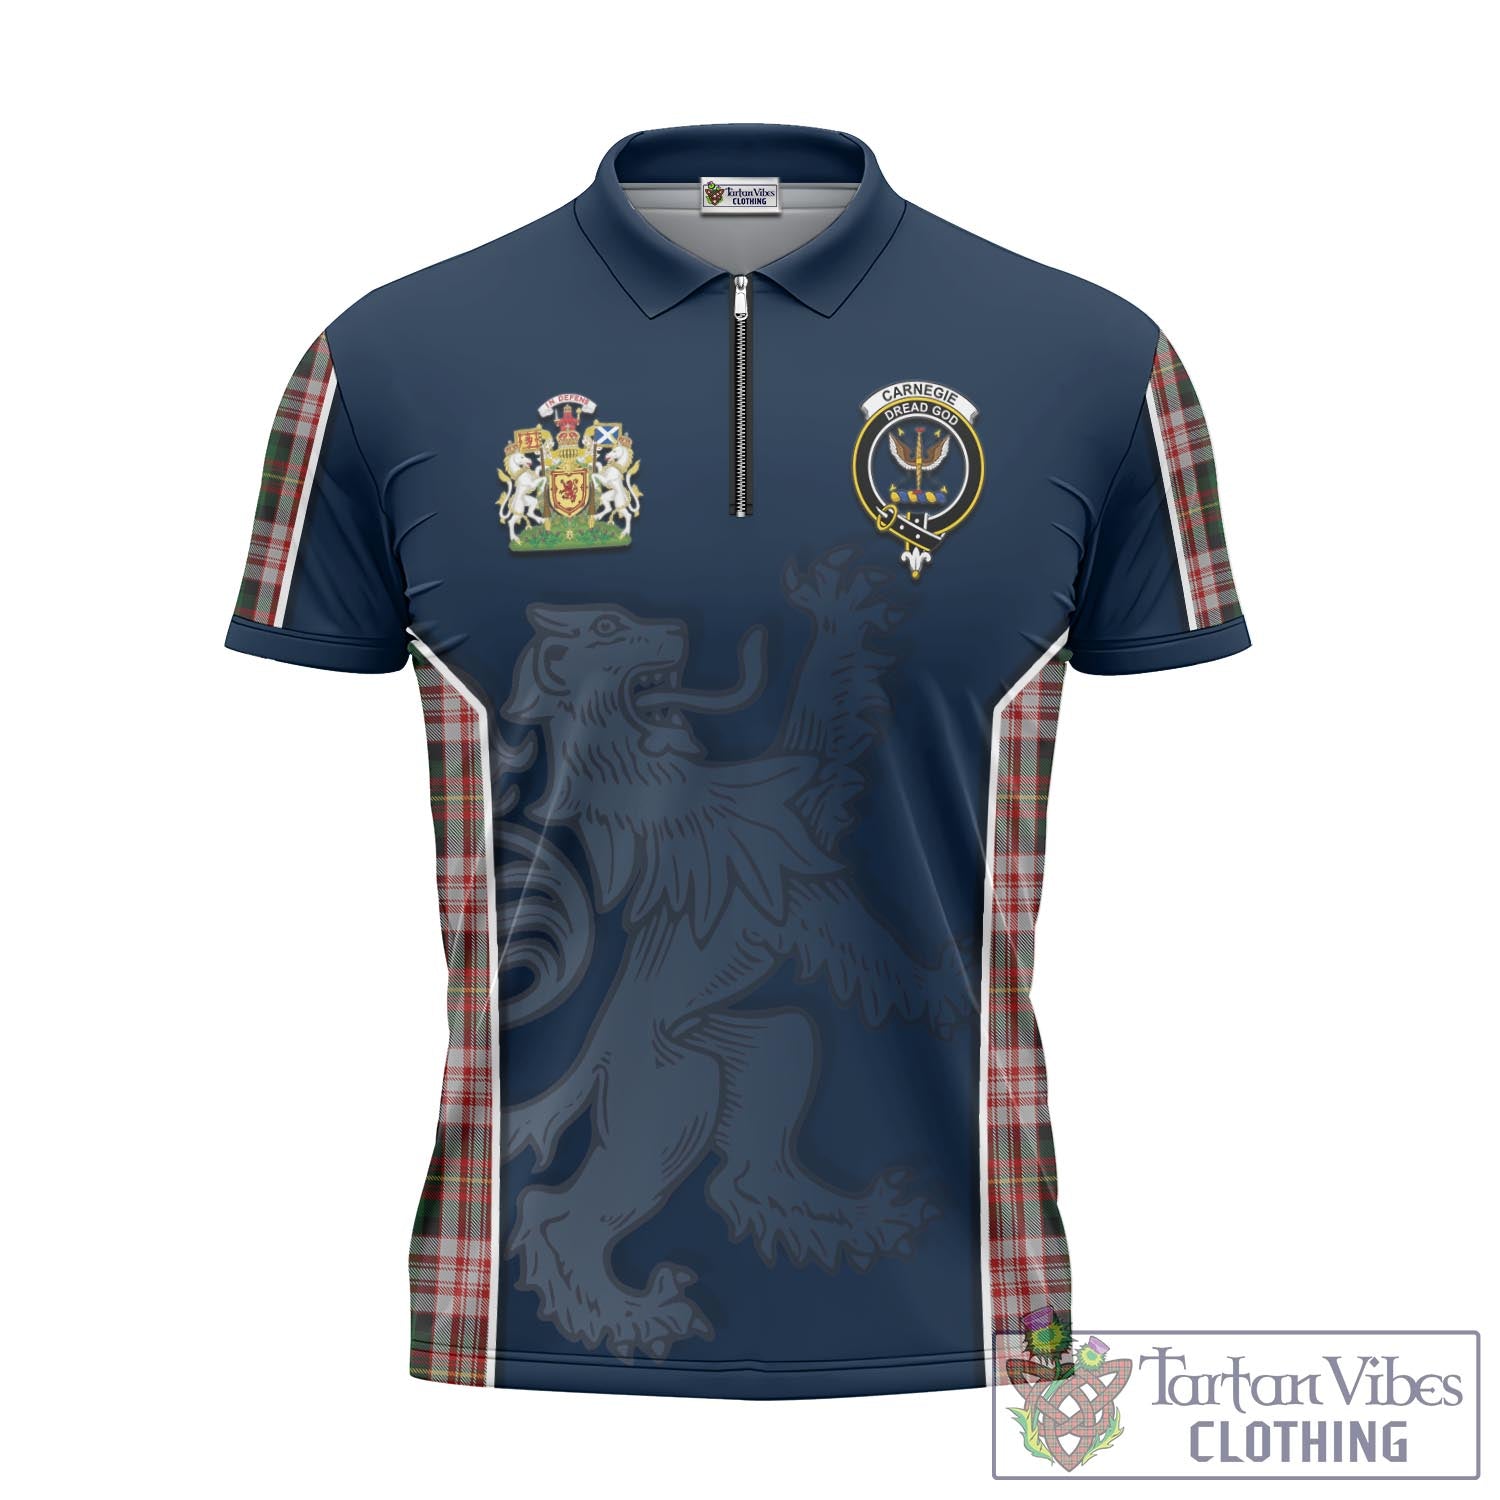 Tartan Vibes Clothing Carnegie Dress Tartan Zipper Polo Shirt with Family Crest and Lion Rampant Vibes Sport Style